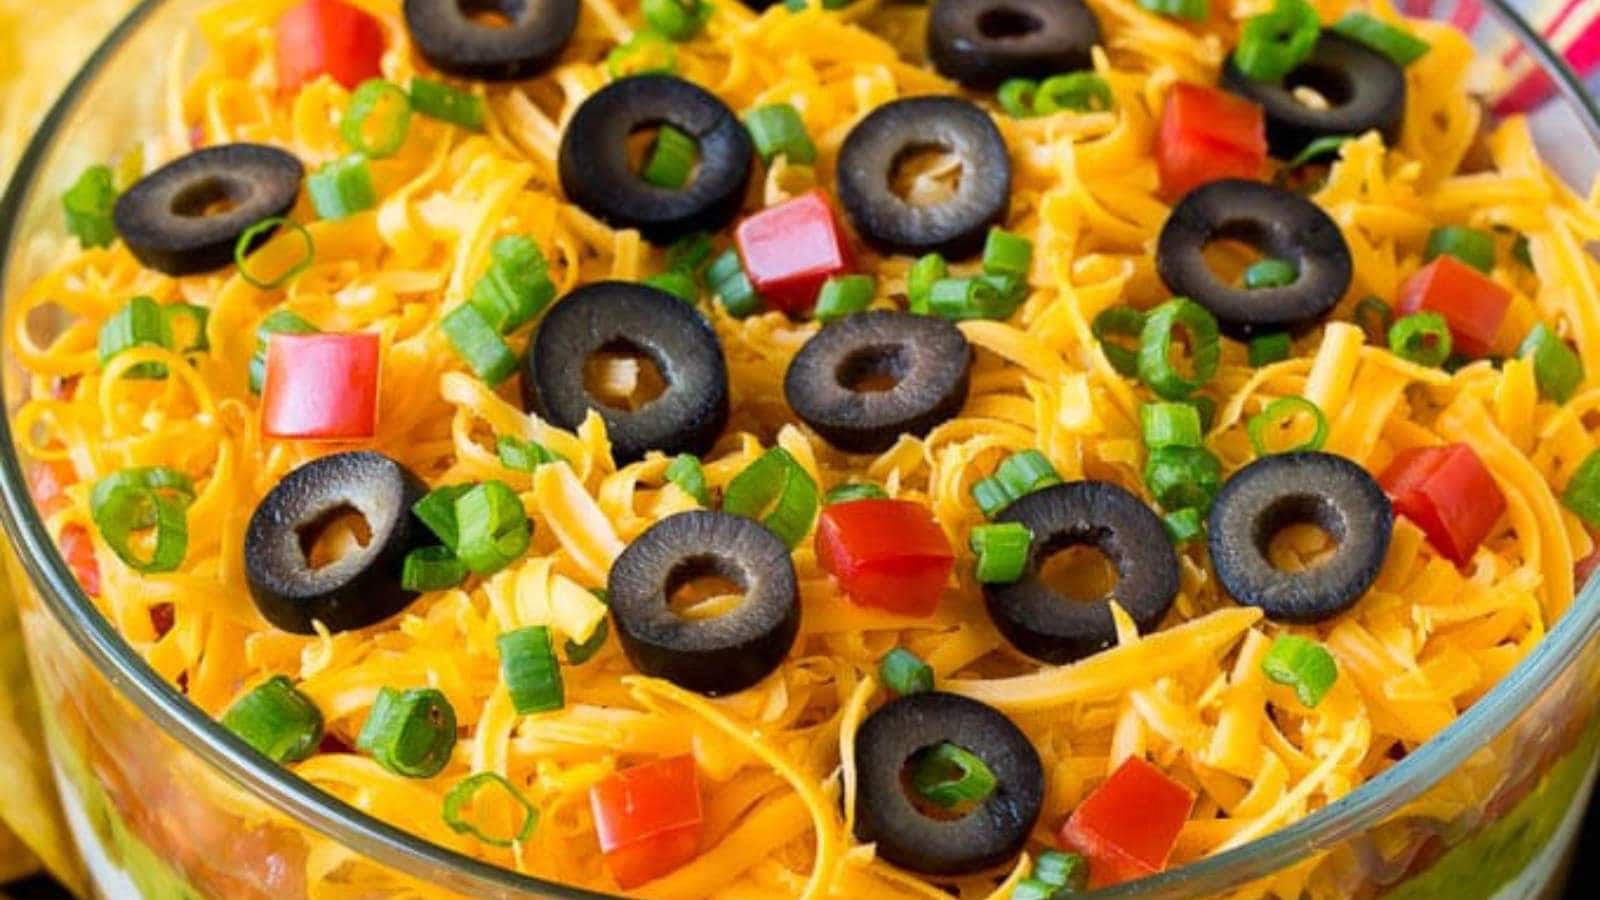 7 Layer Dip recipe by Dinner At The Zoo.